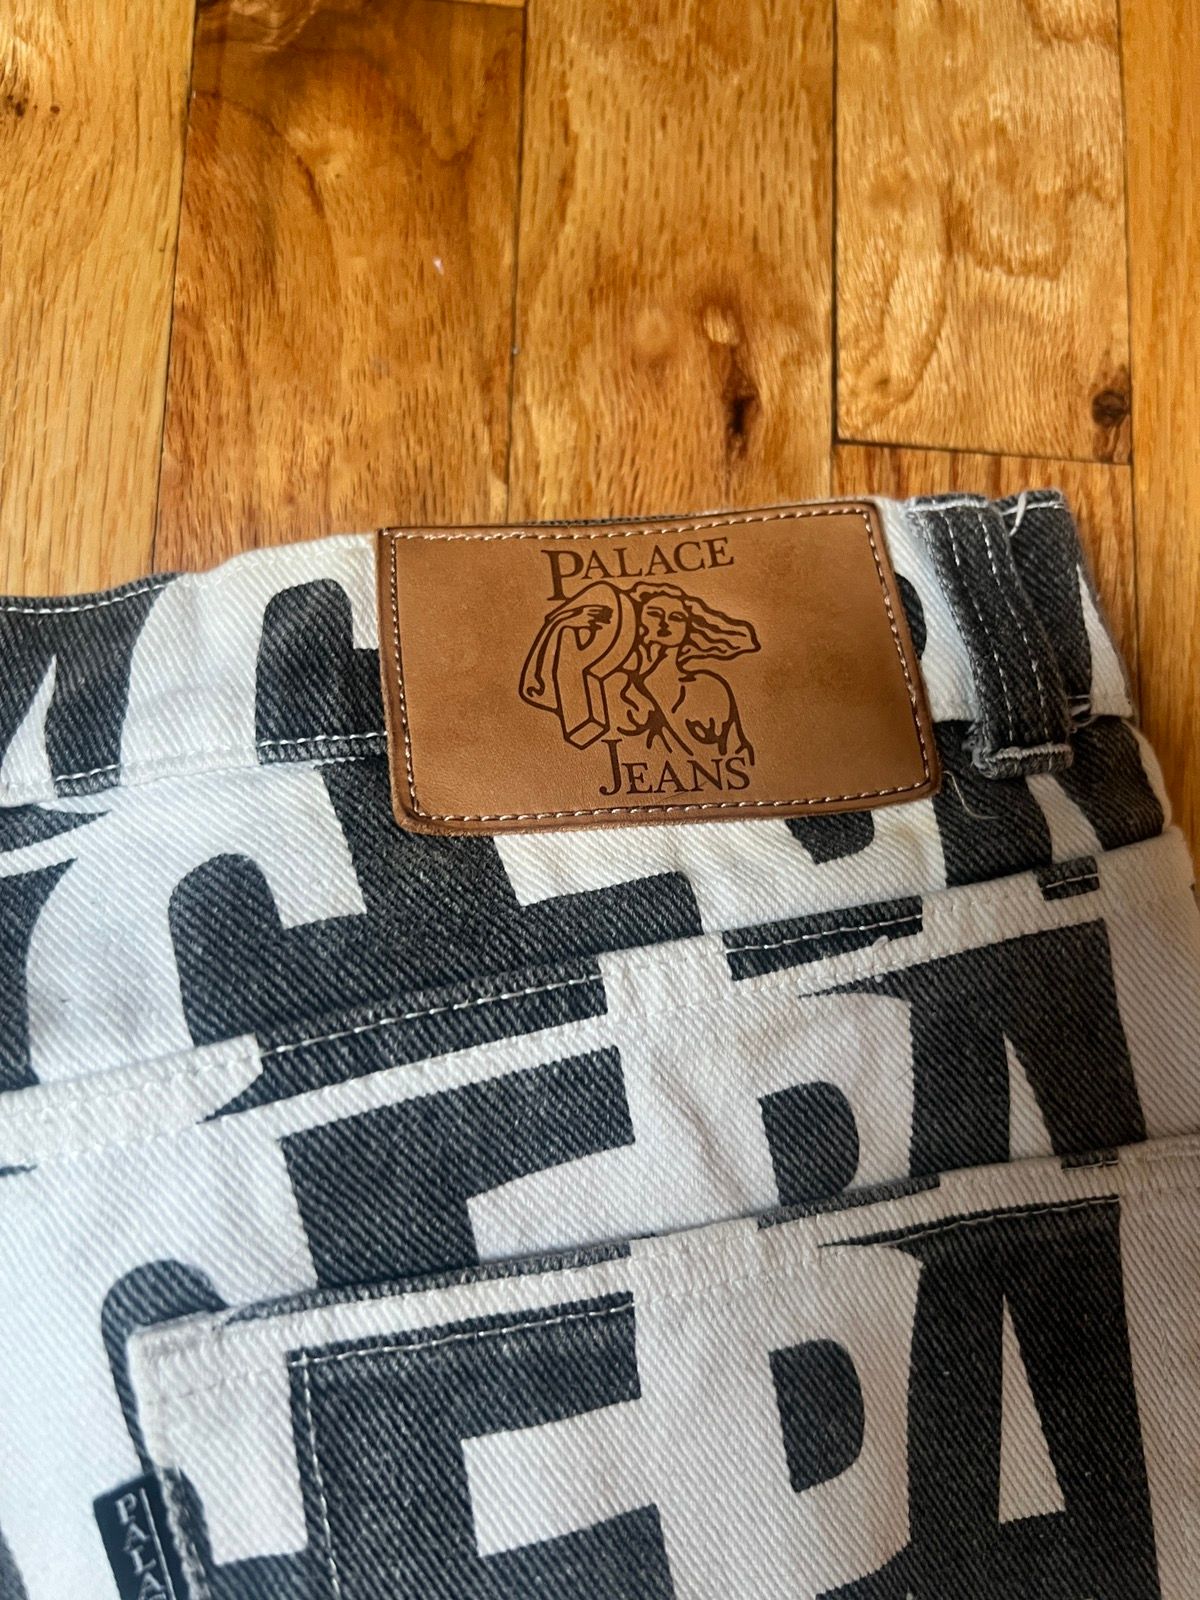 Palace Palace Repeater Denim Jeans Size US 34 / EU 50 - 4 Preview